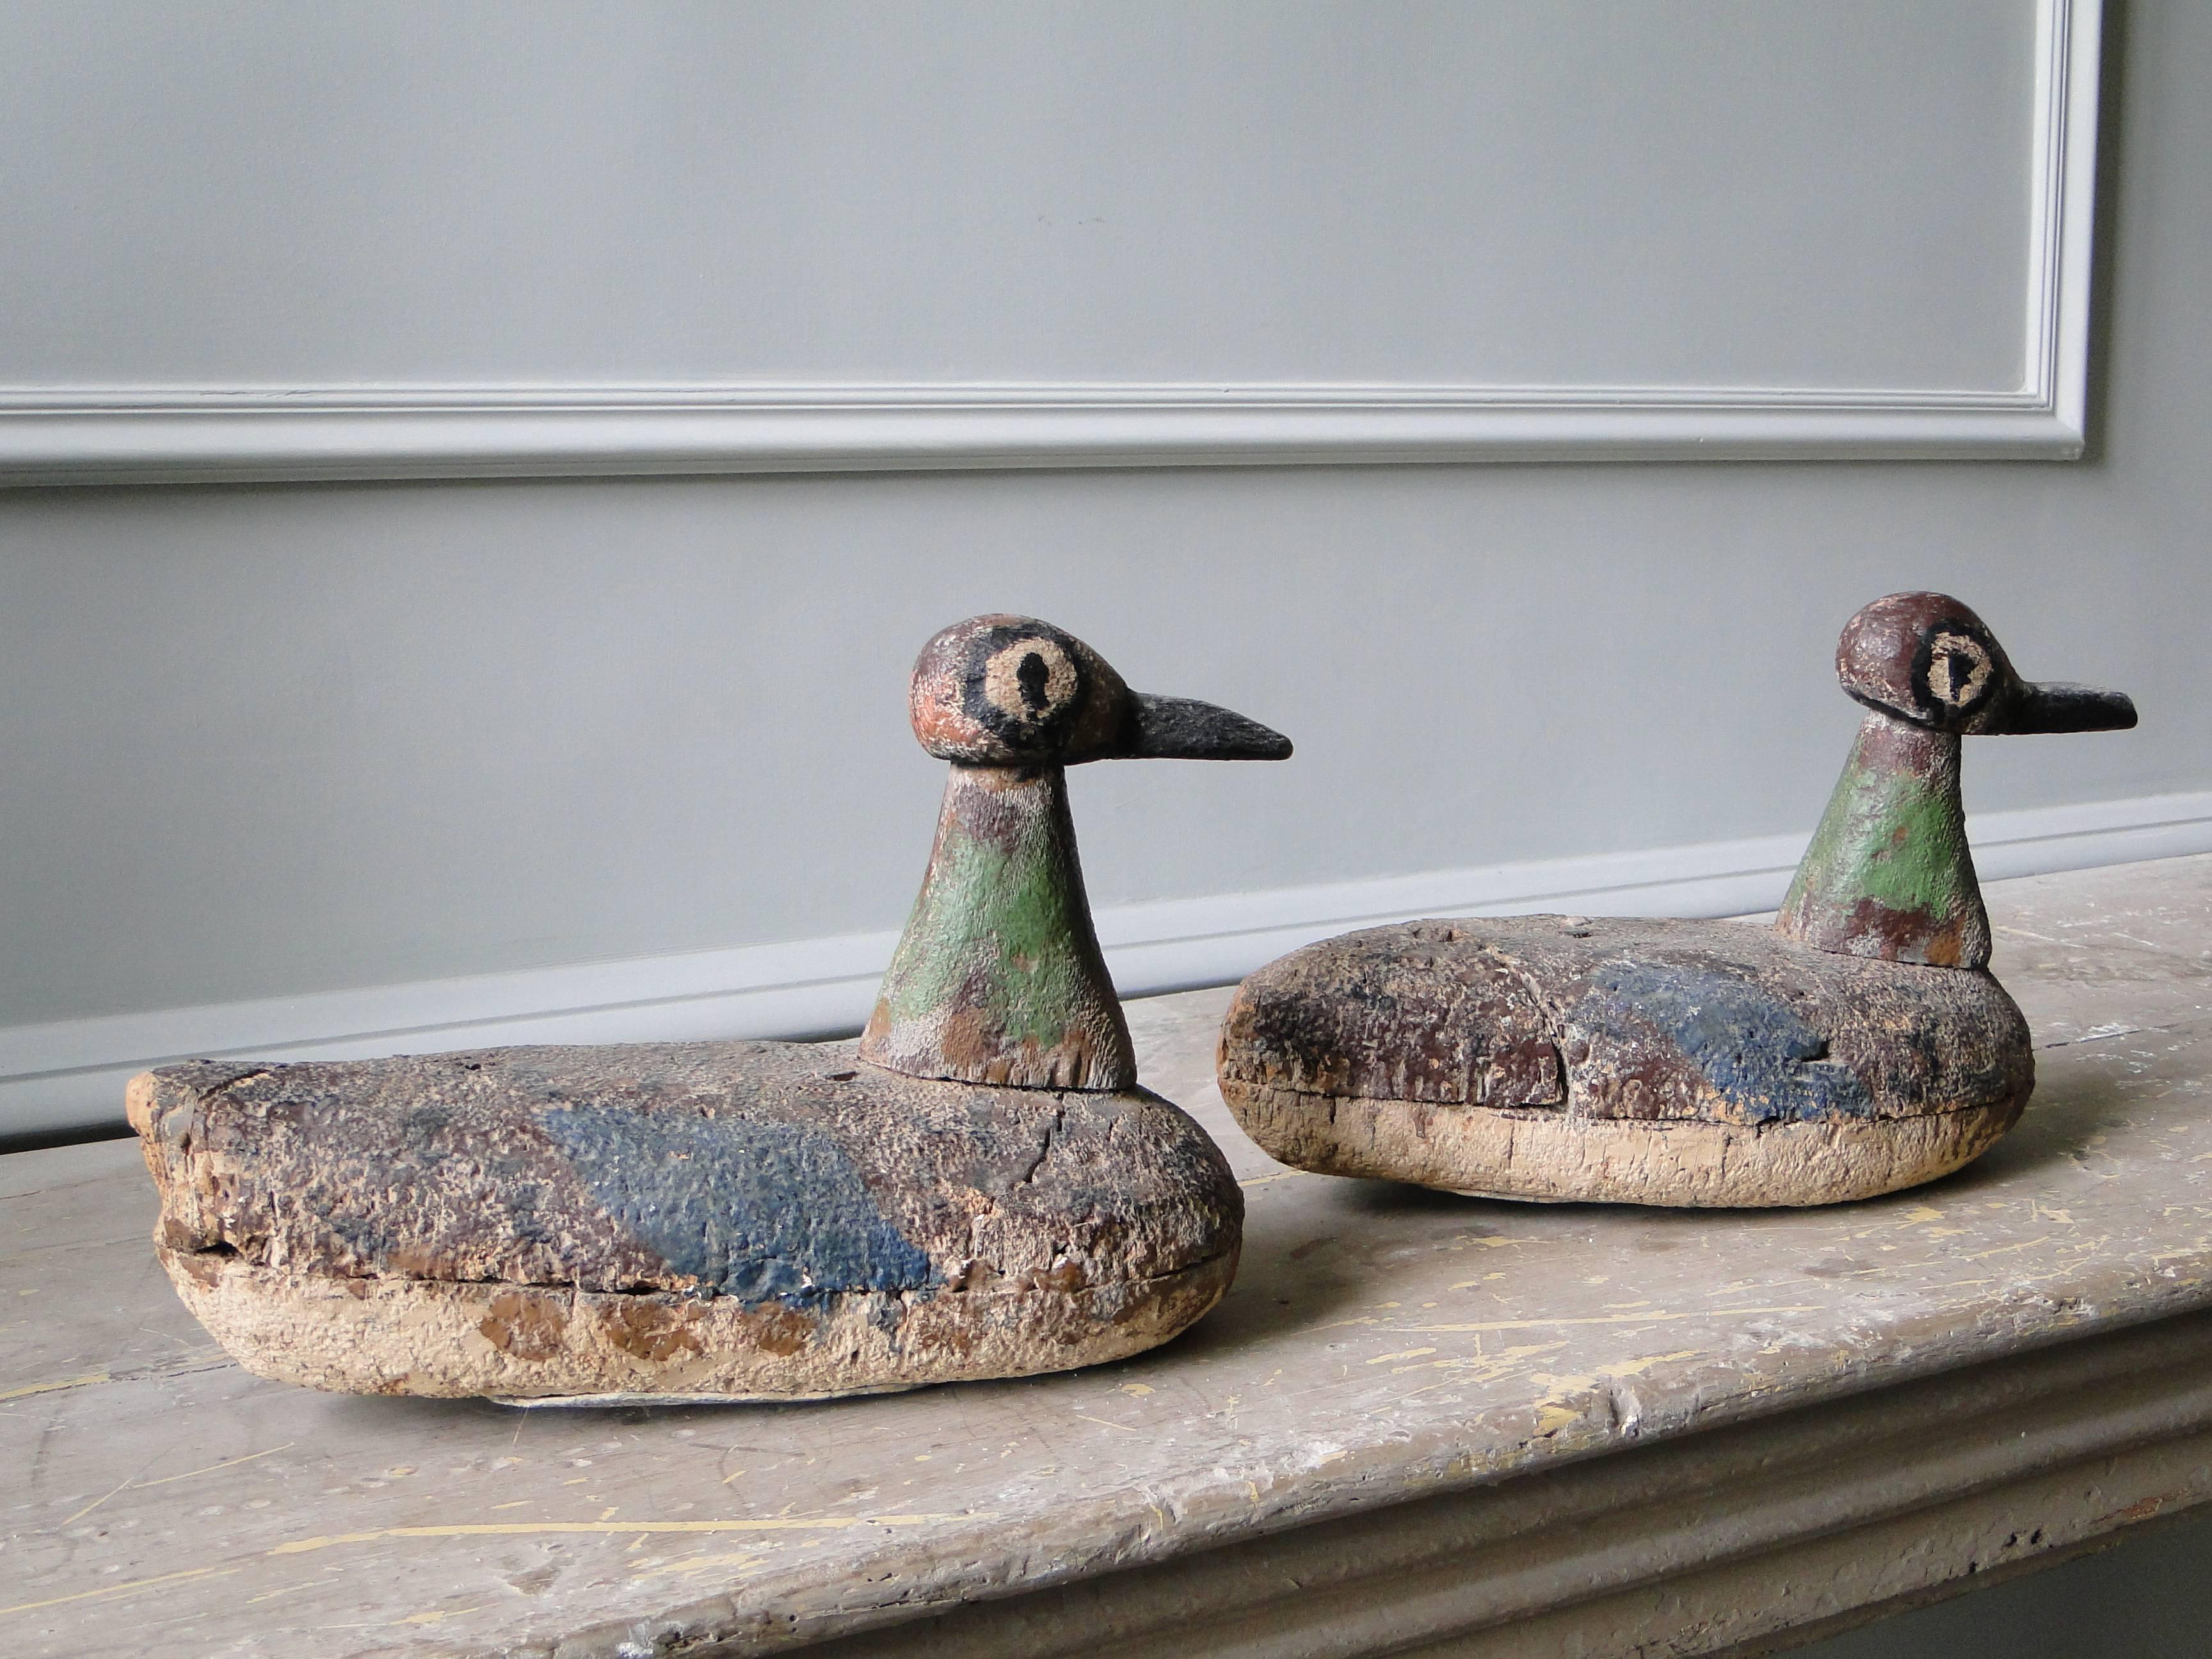 Two original painted decoy ducks, 19th century, wood and cork.